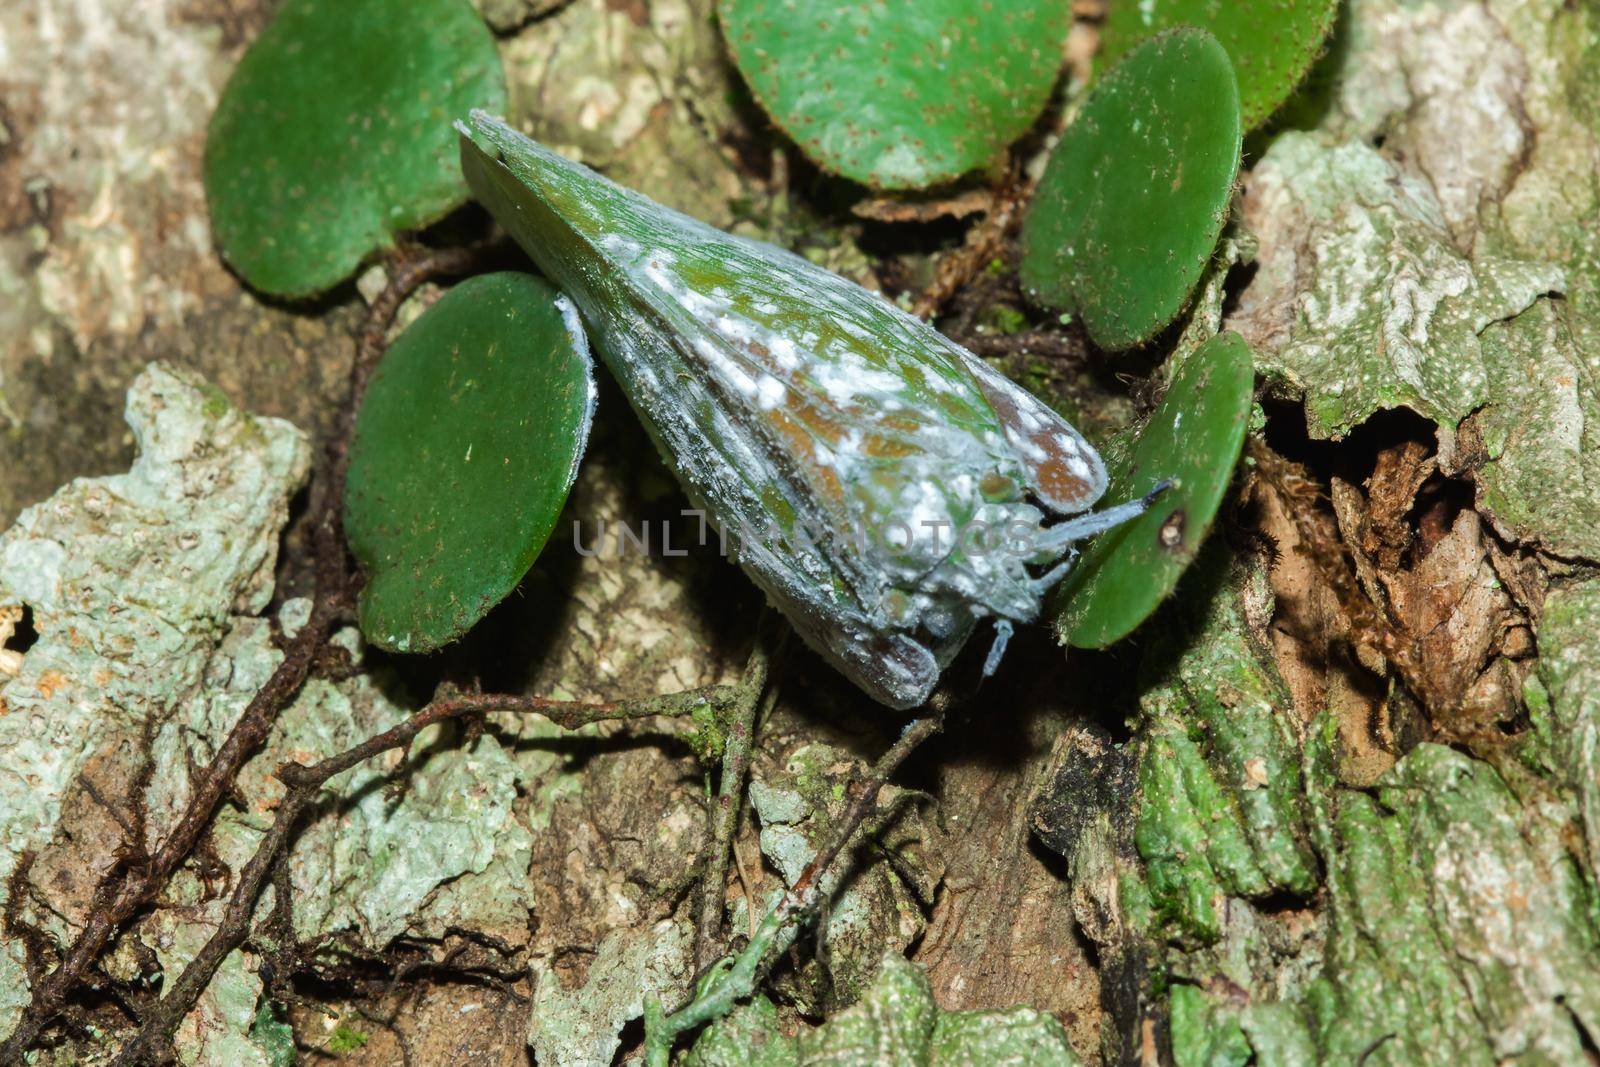 Flatid planthopper, or Moth bugs, wedge-shaped cicadas are small insects on a tree. by Puripatt